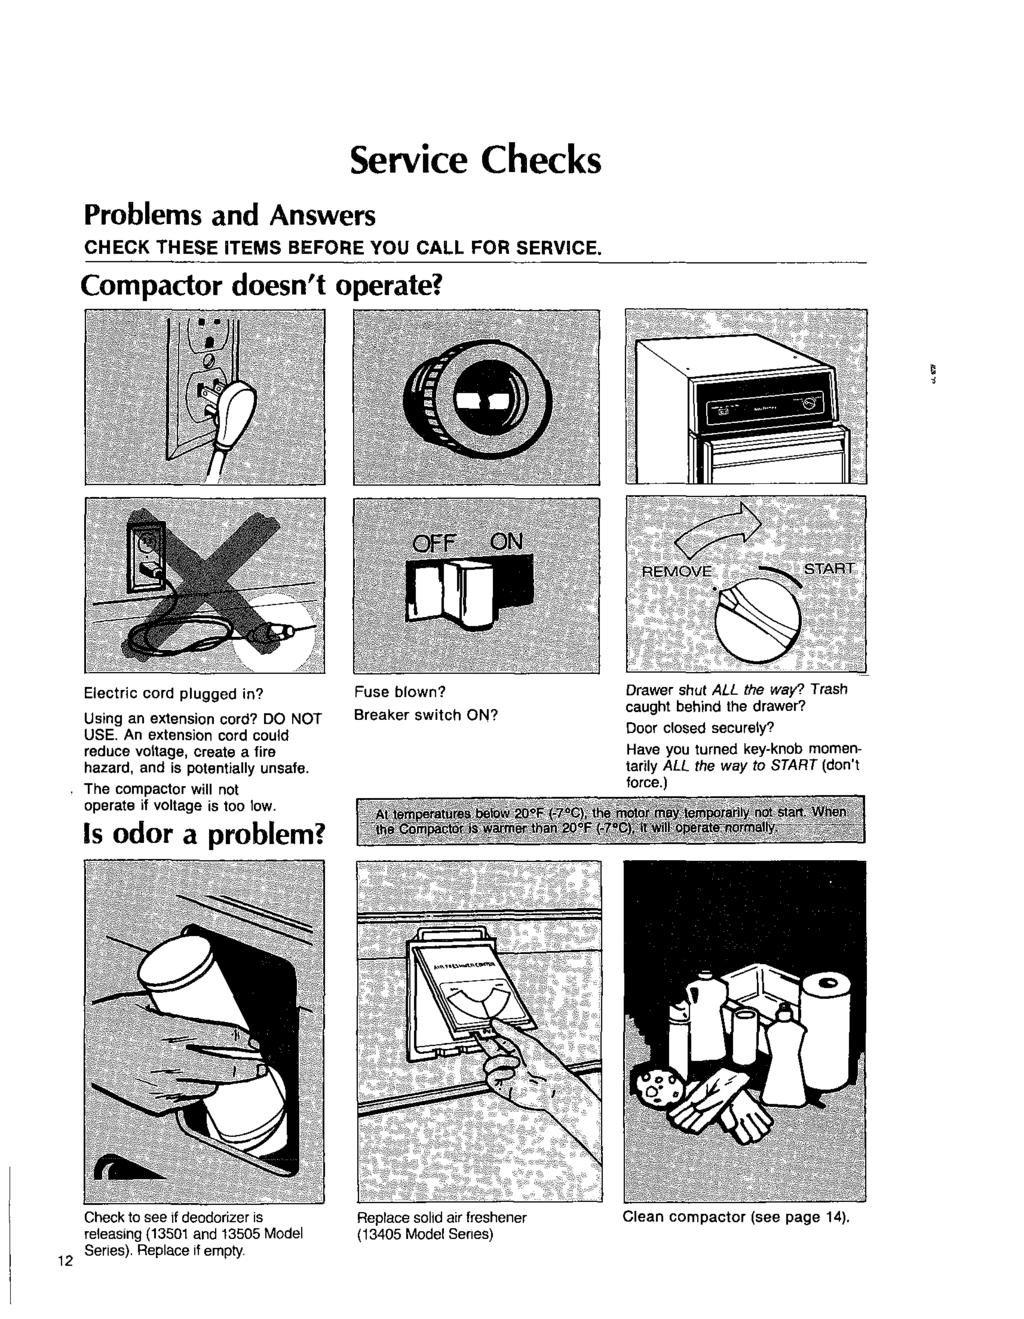 Service Checks Problems and Answers CHECK THESE ITEMS BEFORE YOU CALL FOR SERVICE. Compactor doesn't operate? OFF ON SVxRl Electric cord plugged in? Using an extension cord? DO NOT USE.